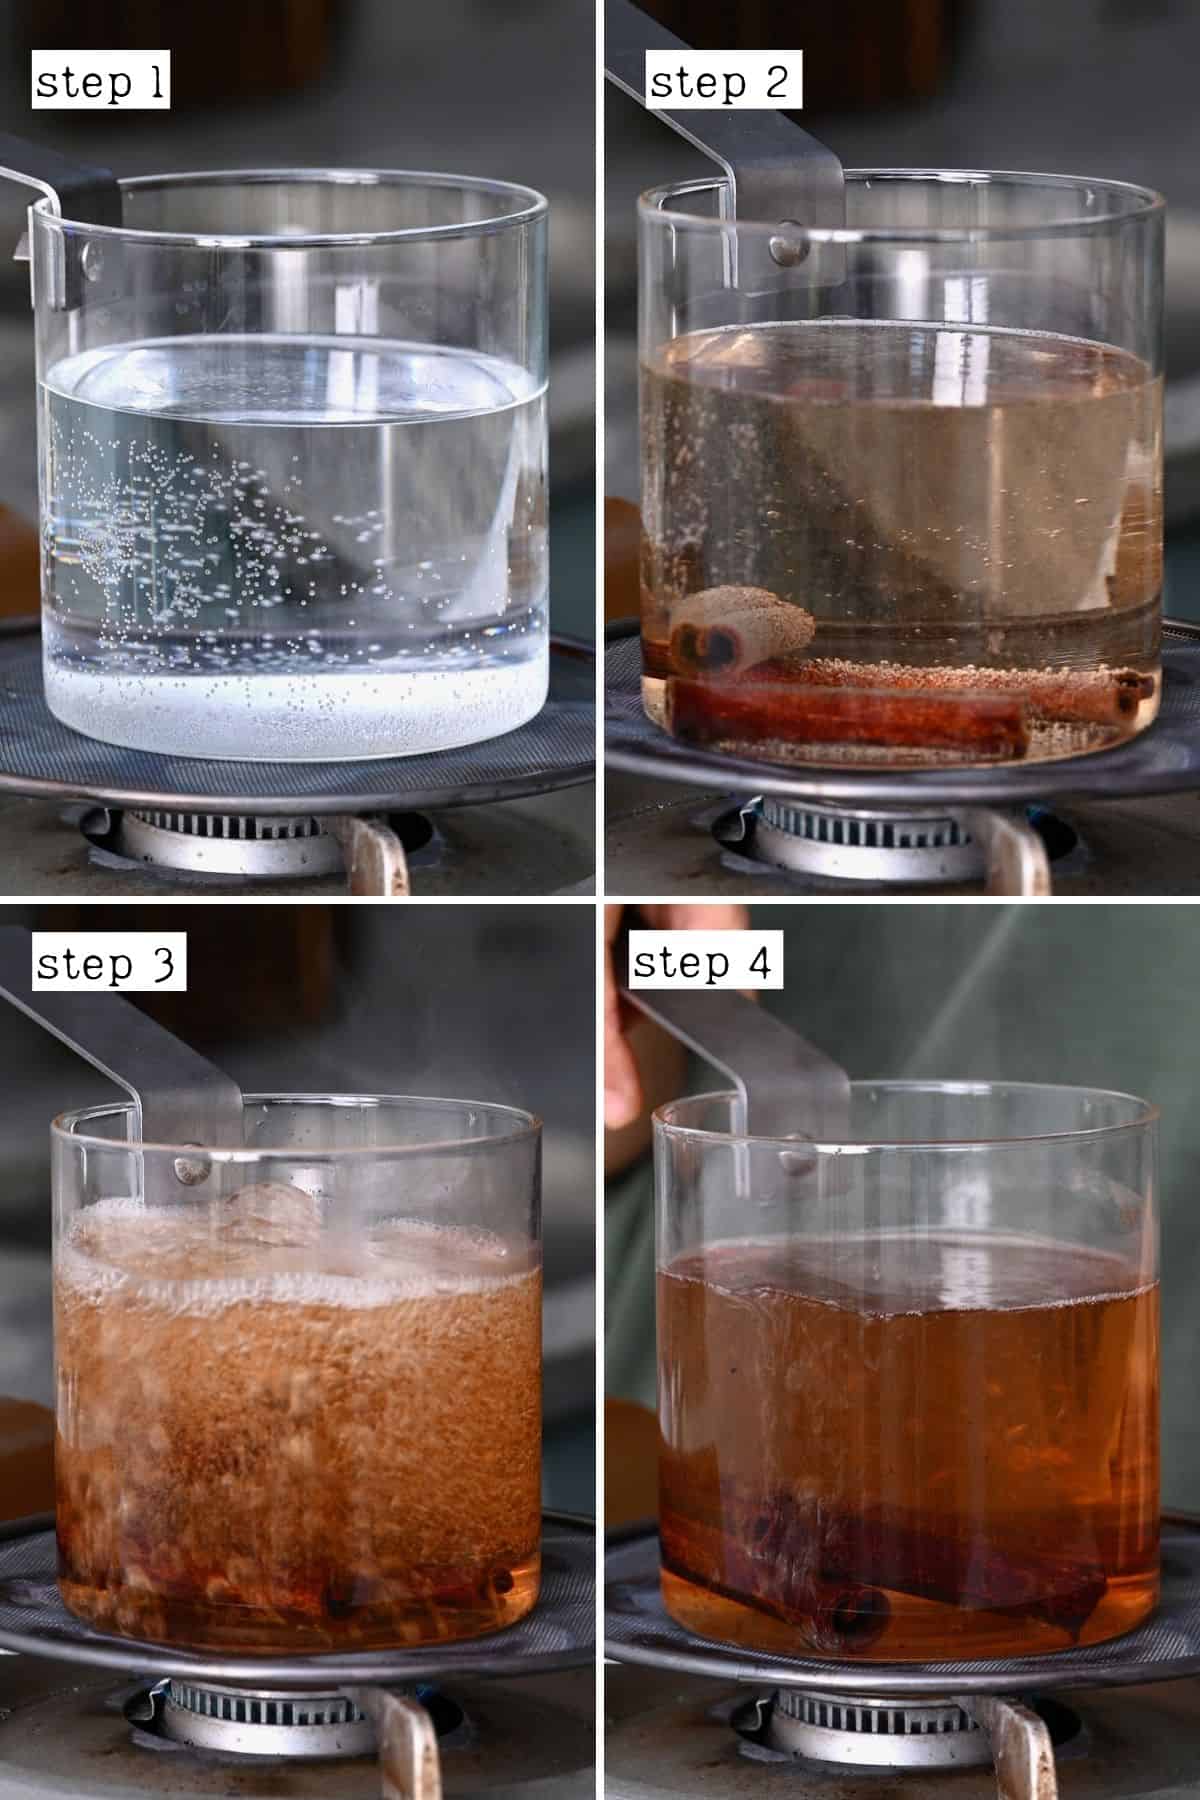 Steps for boiling cinnamon in water